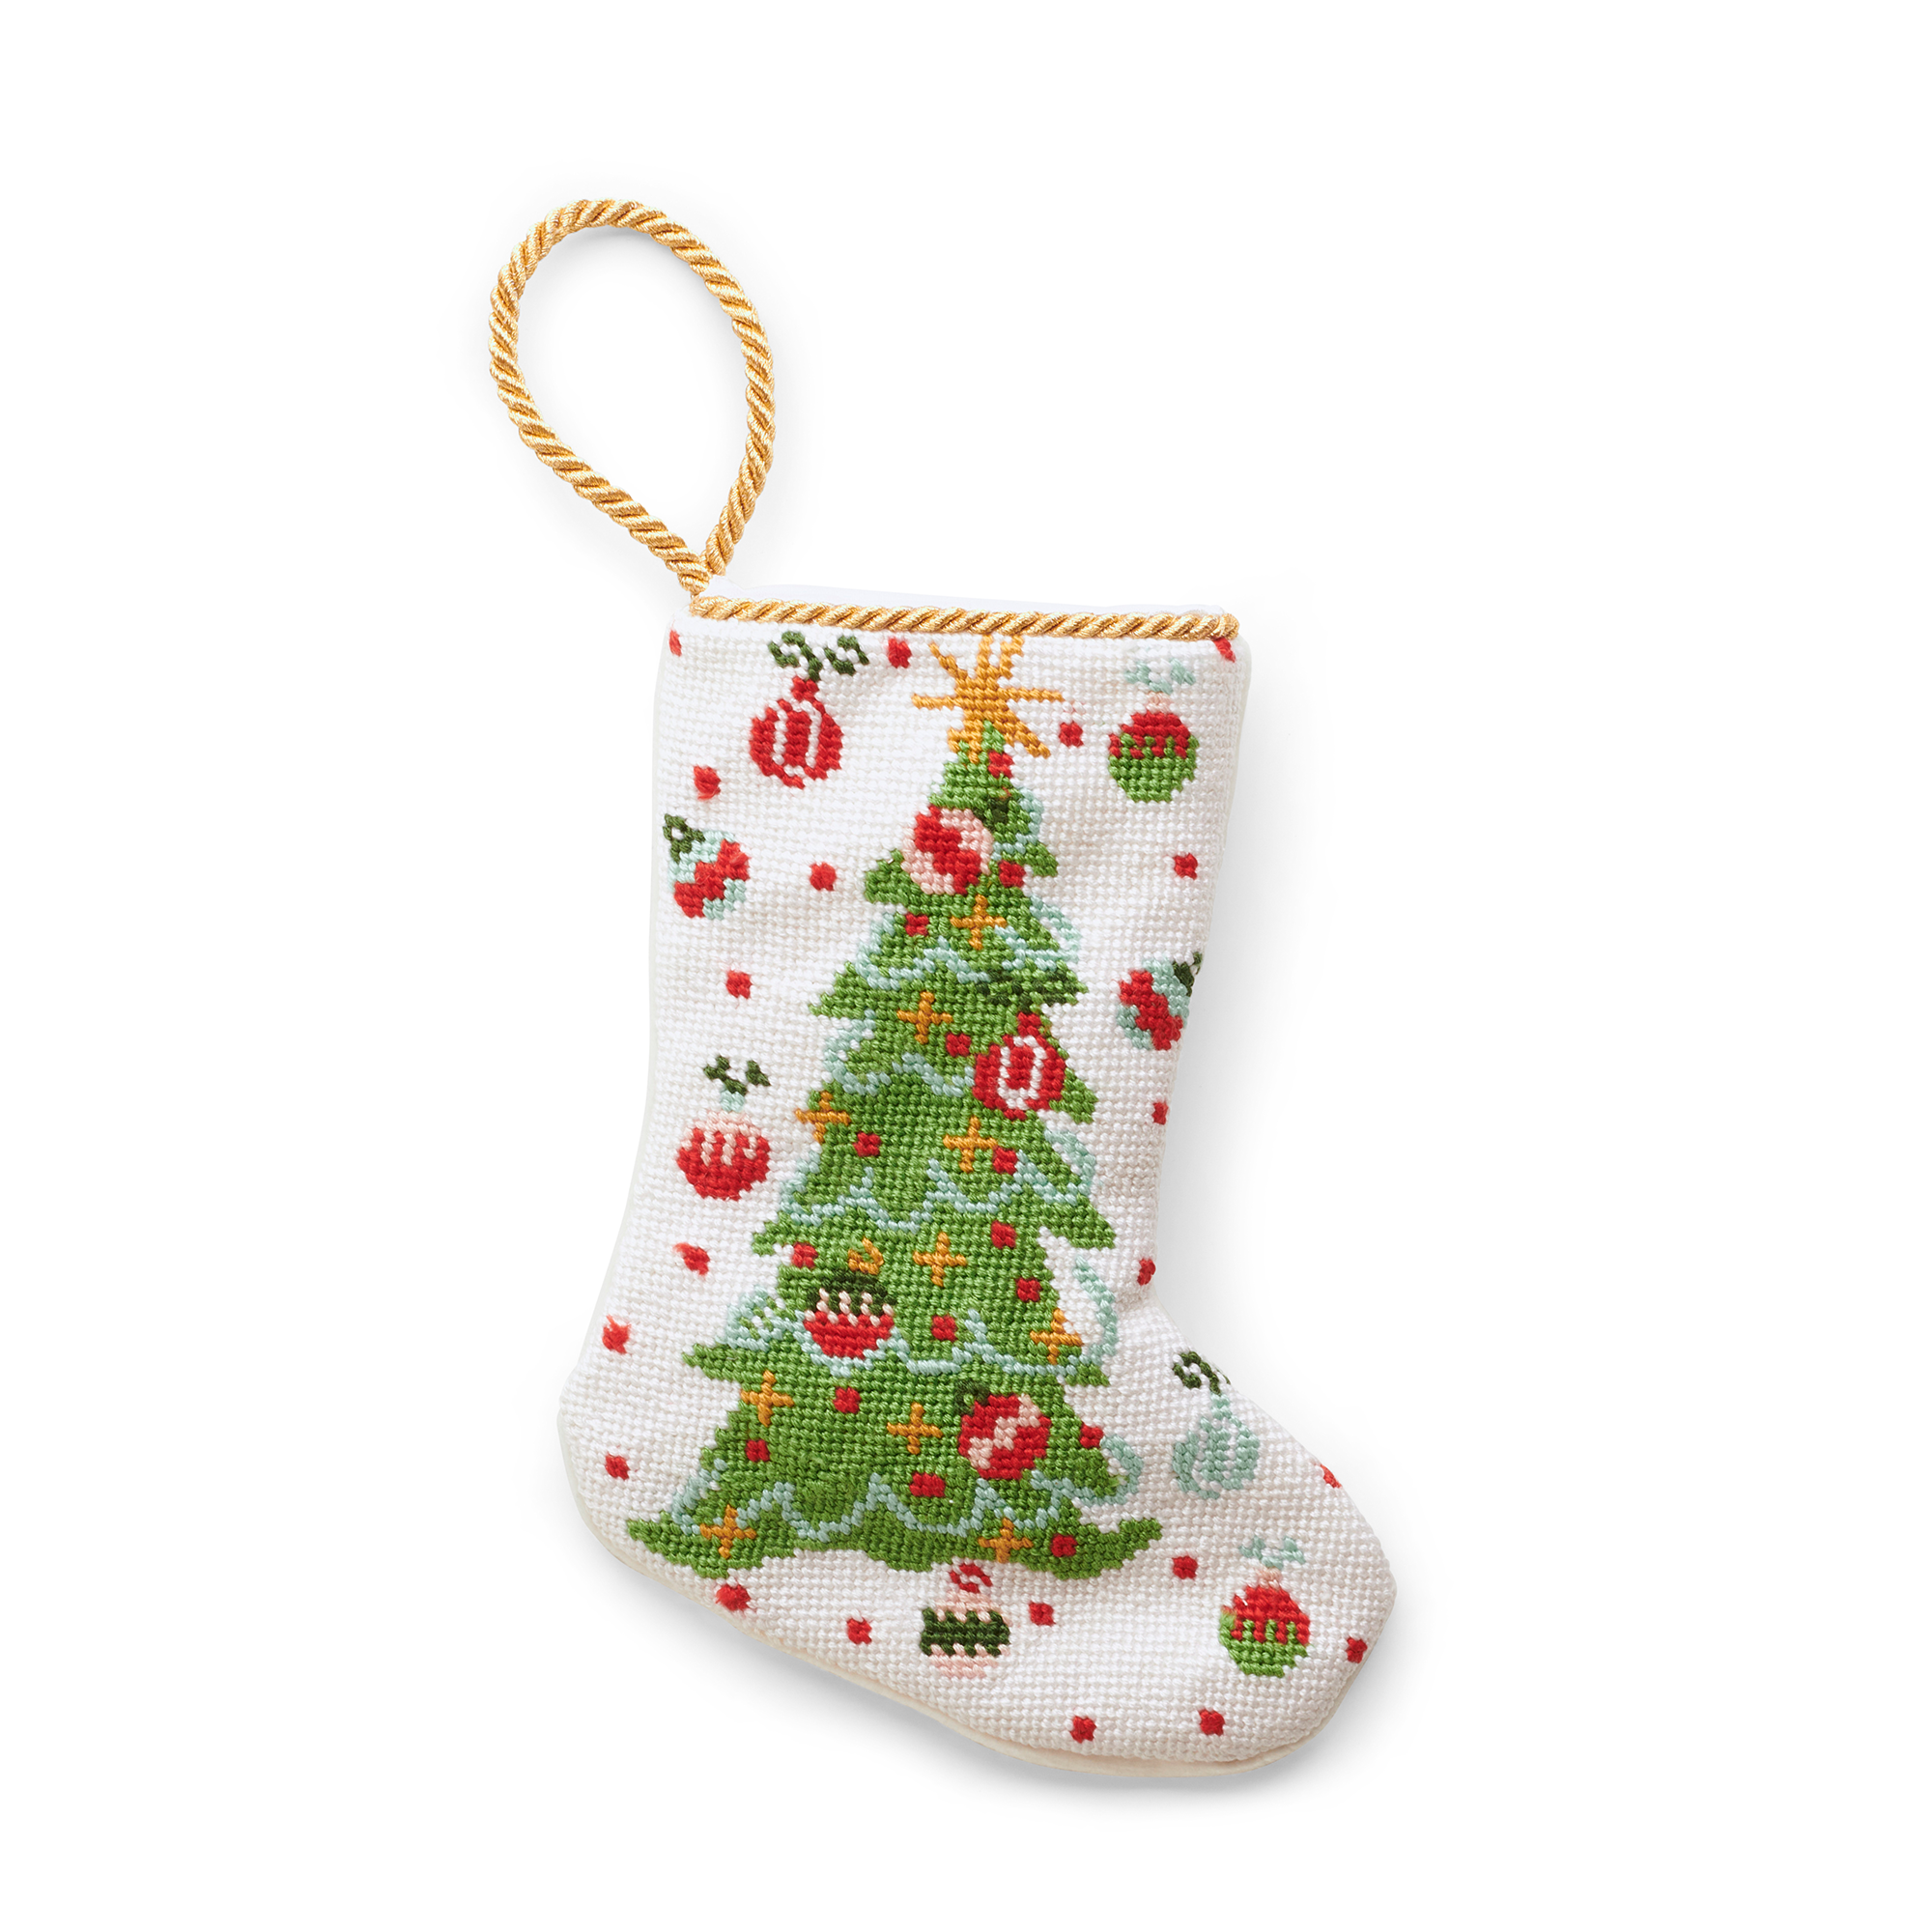 A charming Christmas stocking, featuring an illustrated Christmas tree and tree ornaments flying around on the white background. A gold loop at the top, is making it perfect as tree ornament, place setting, or for hanging by the fireplace.